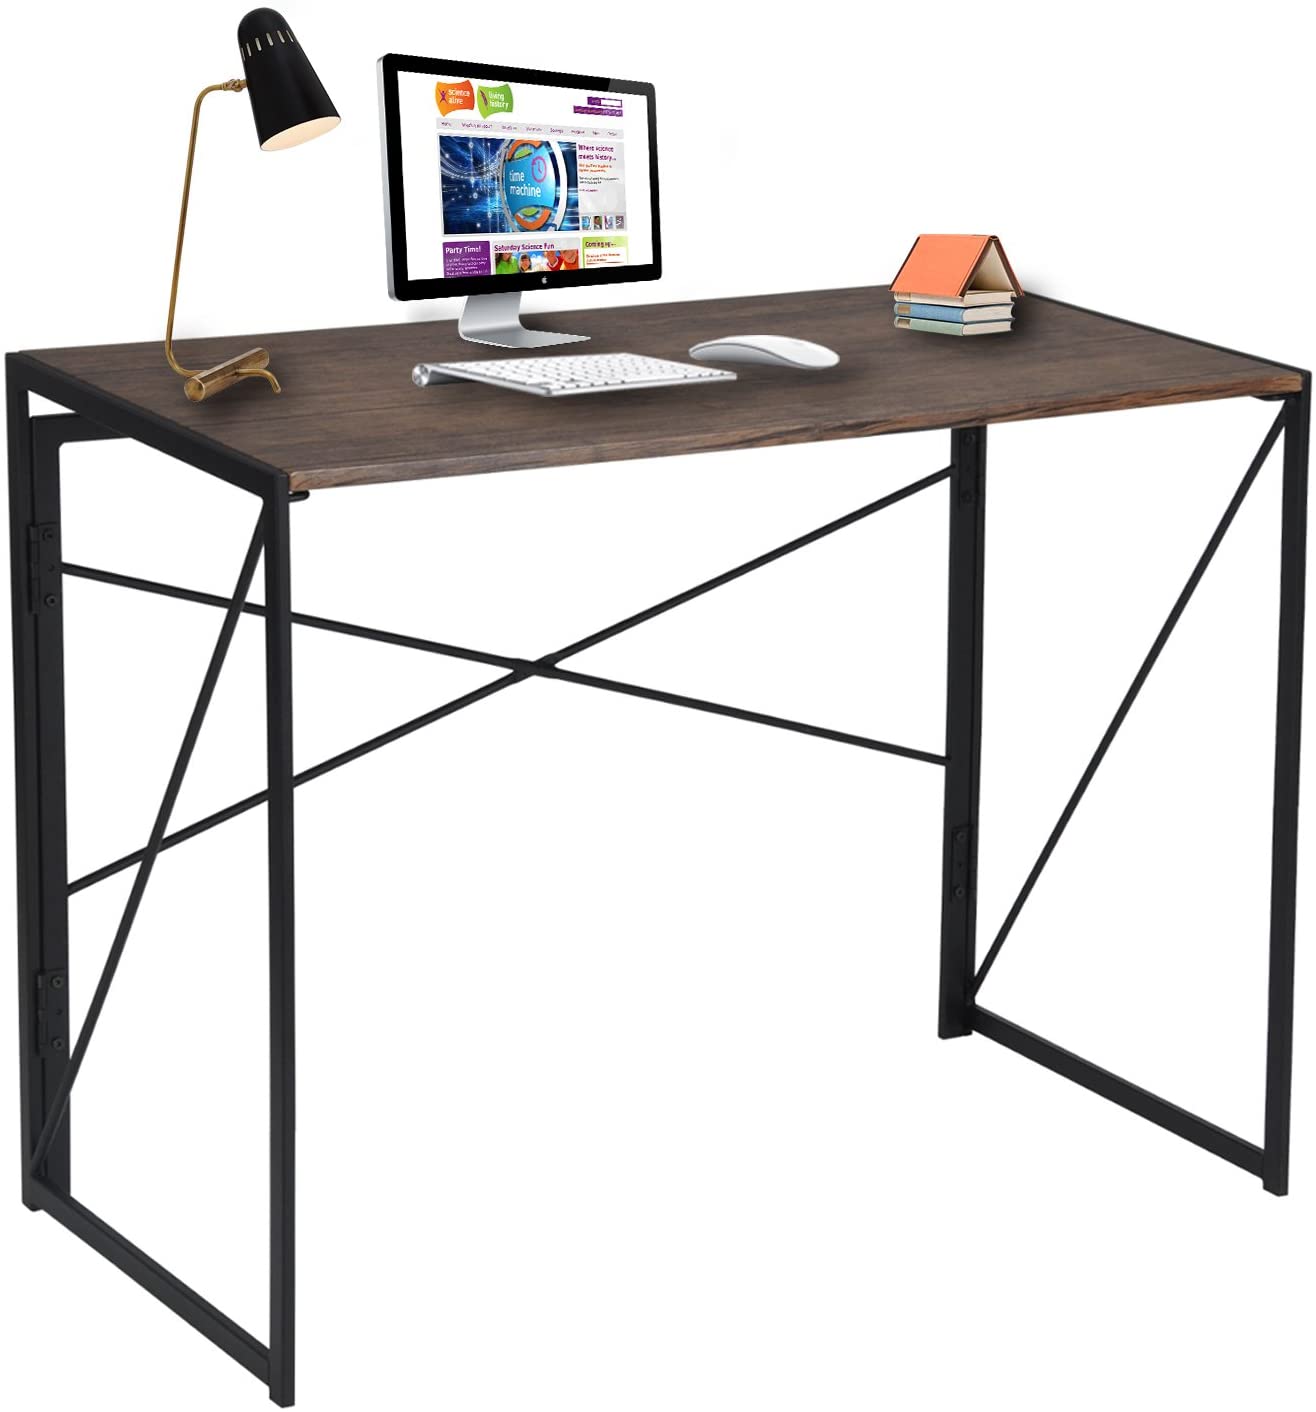 Coavas Folding Industrial No Assembly Computer Desk for Home Office